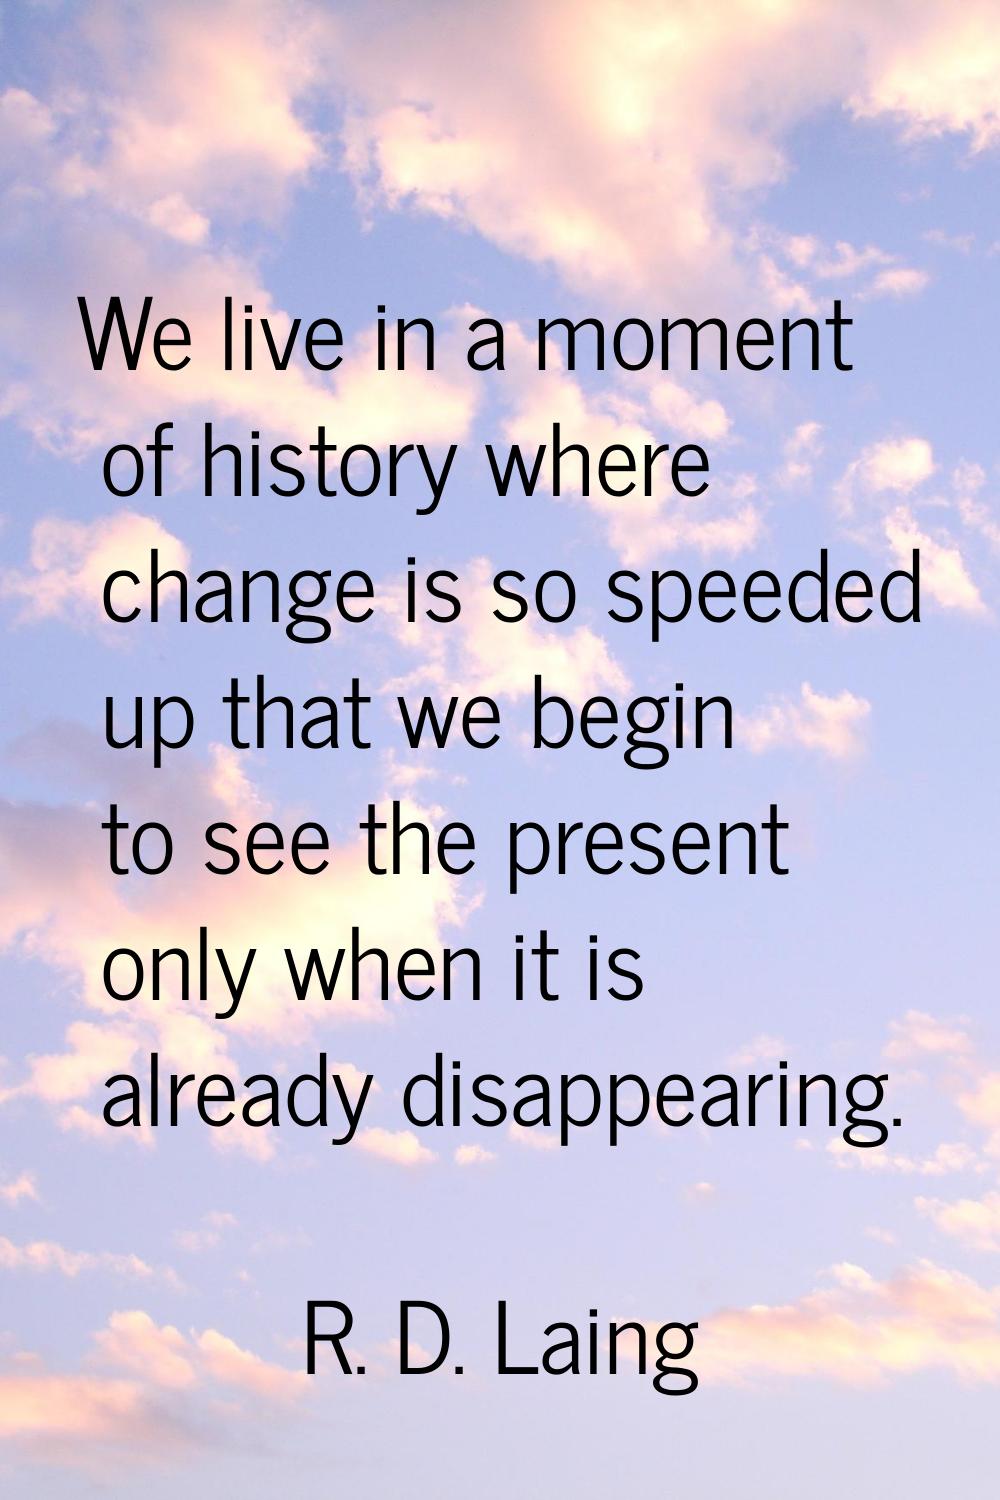 We live in a moment of history where change is so speeded up that we begin to see the present only 